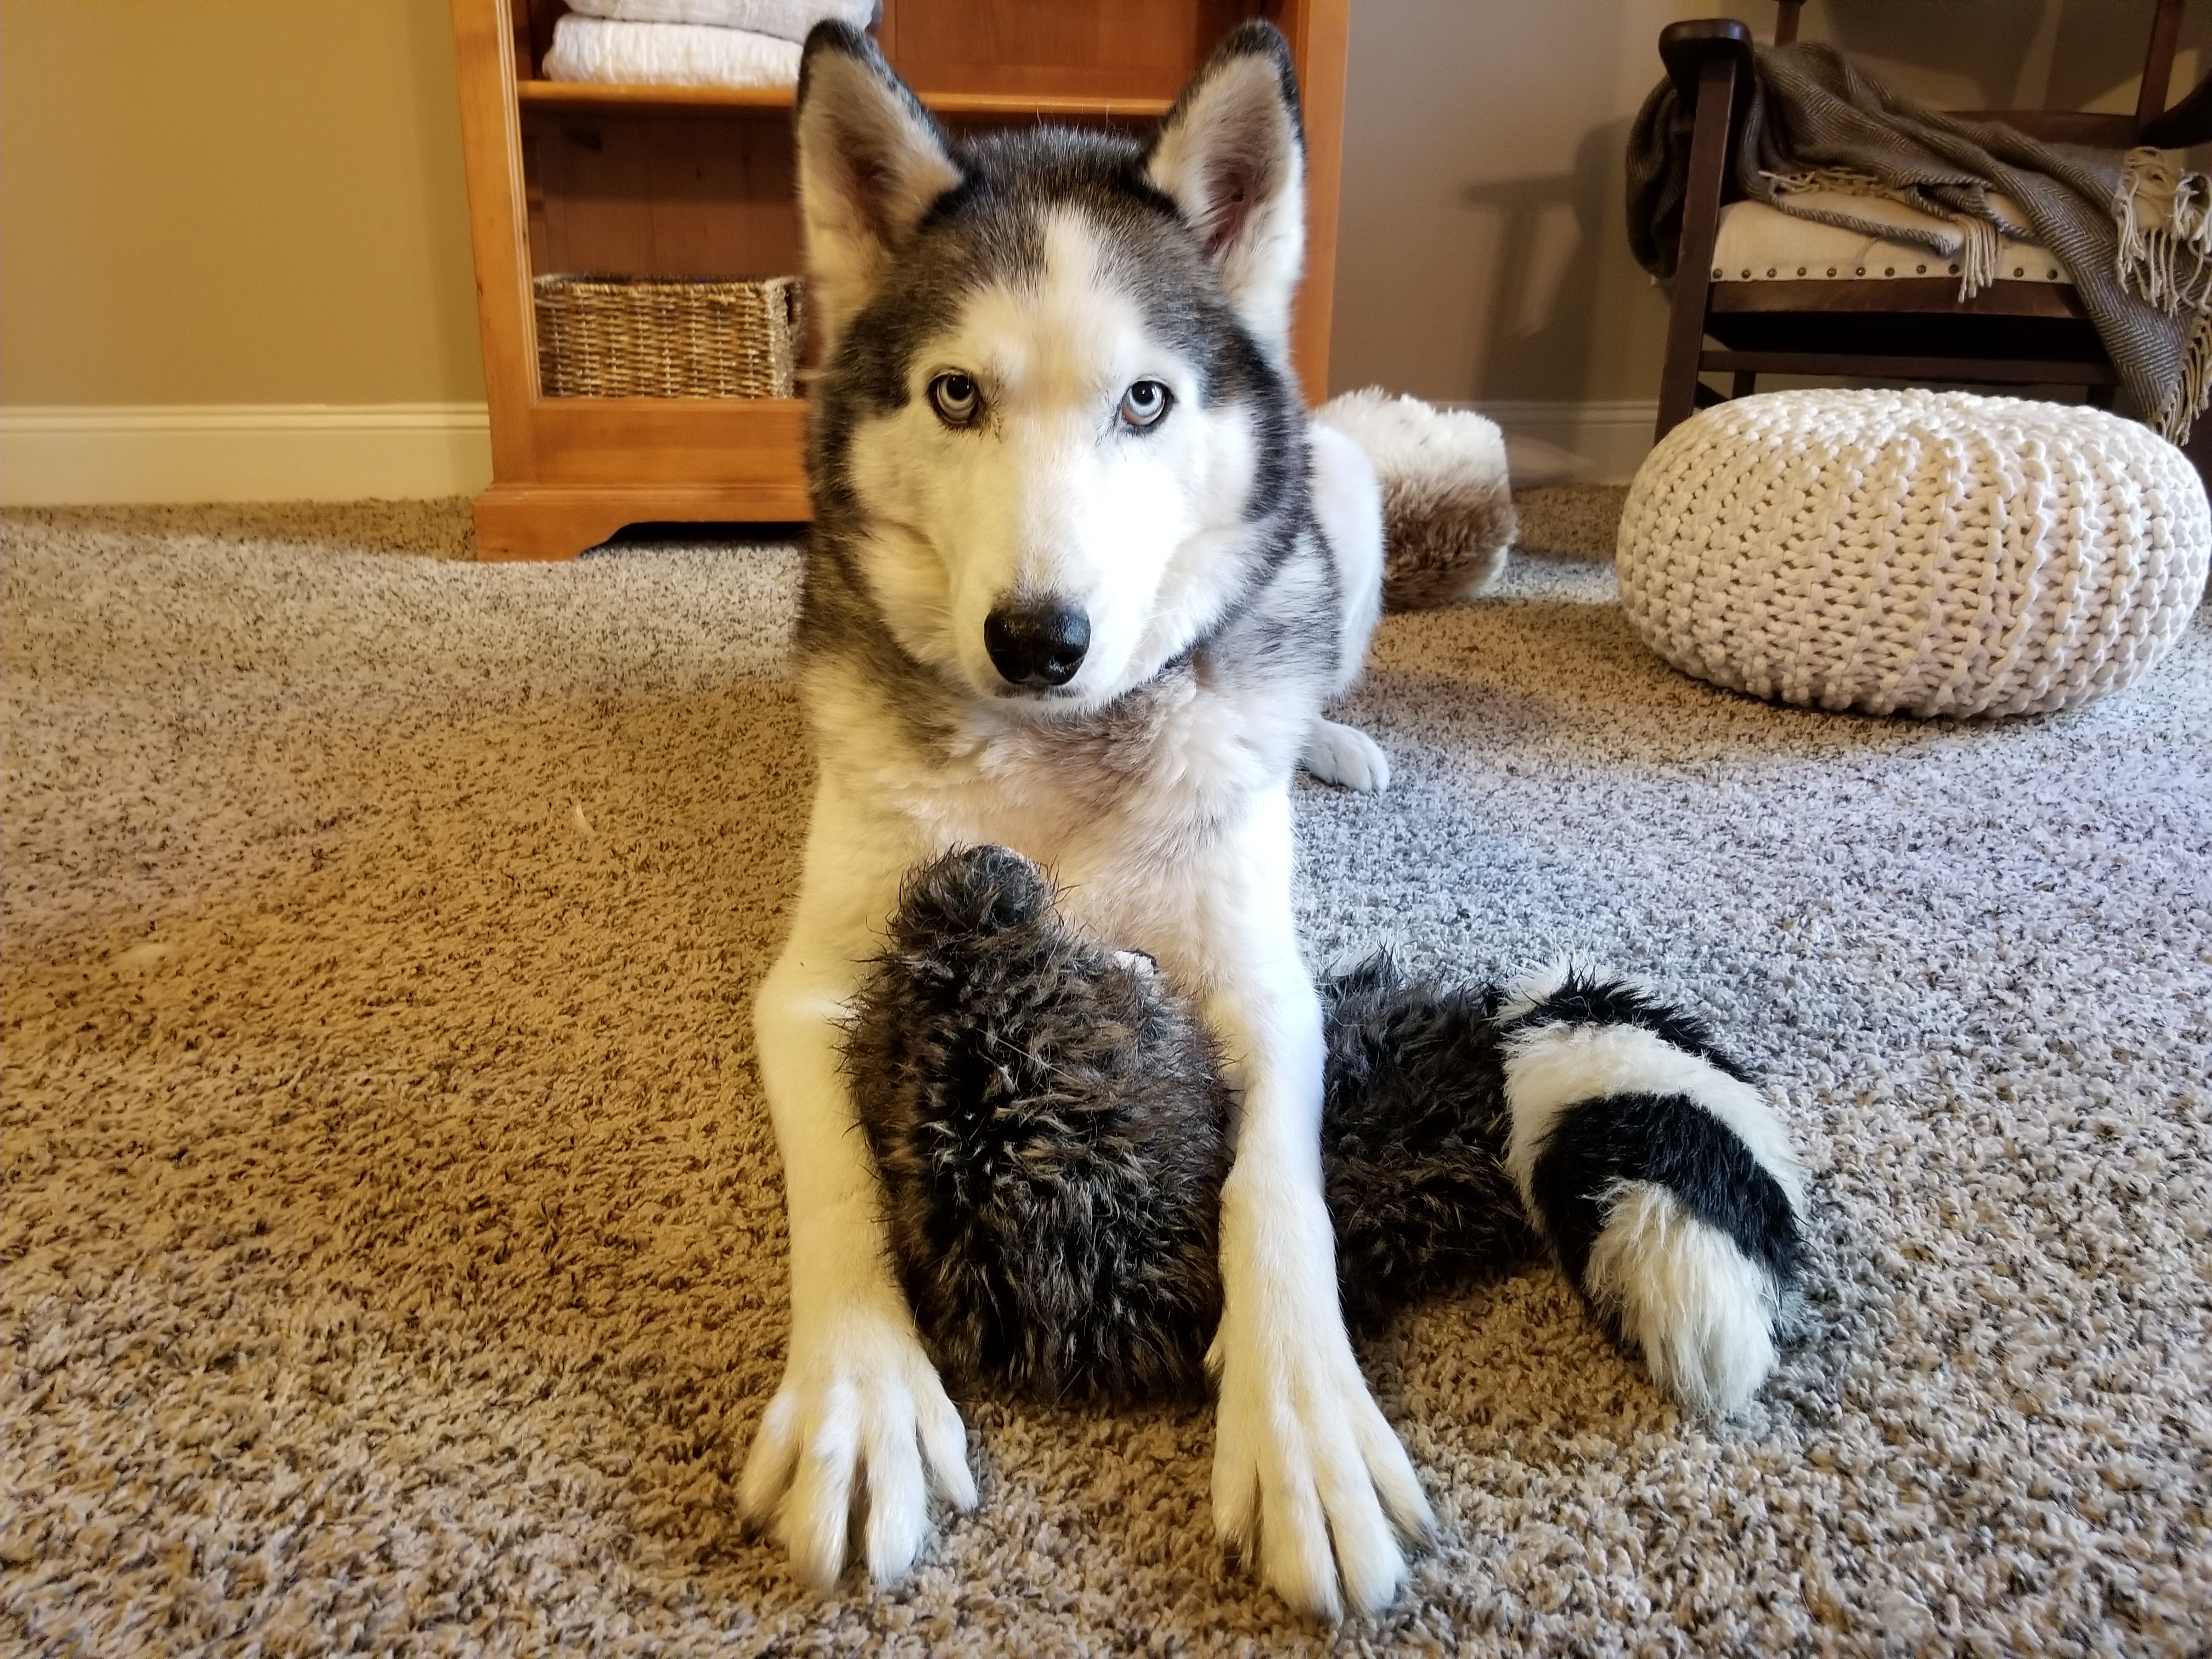 Hunter playing with his raccoon 